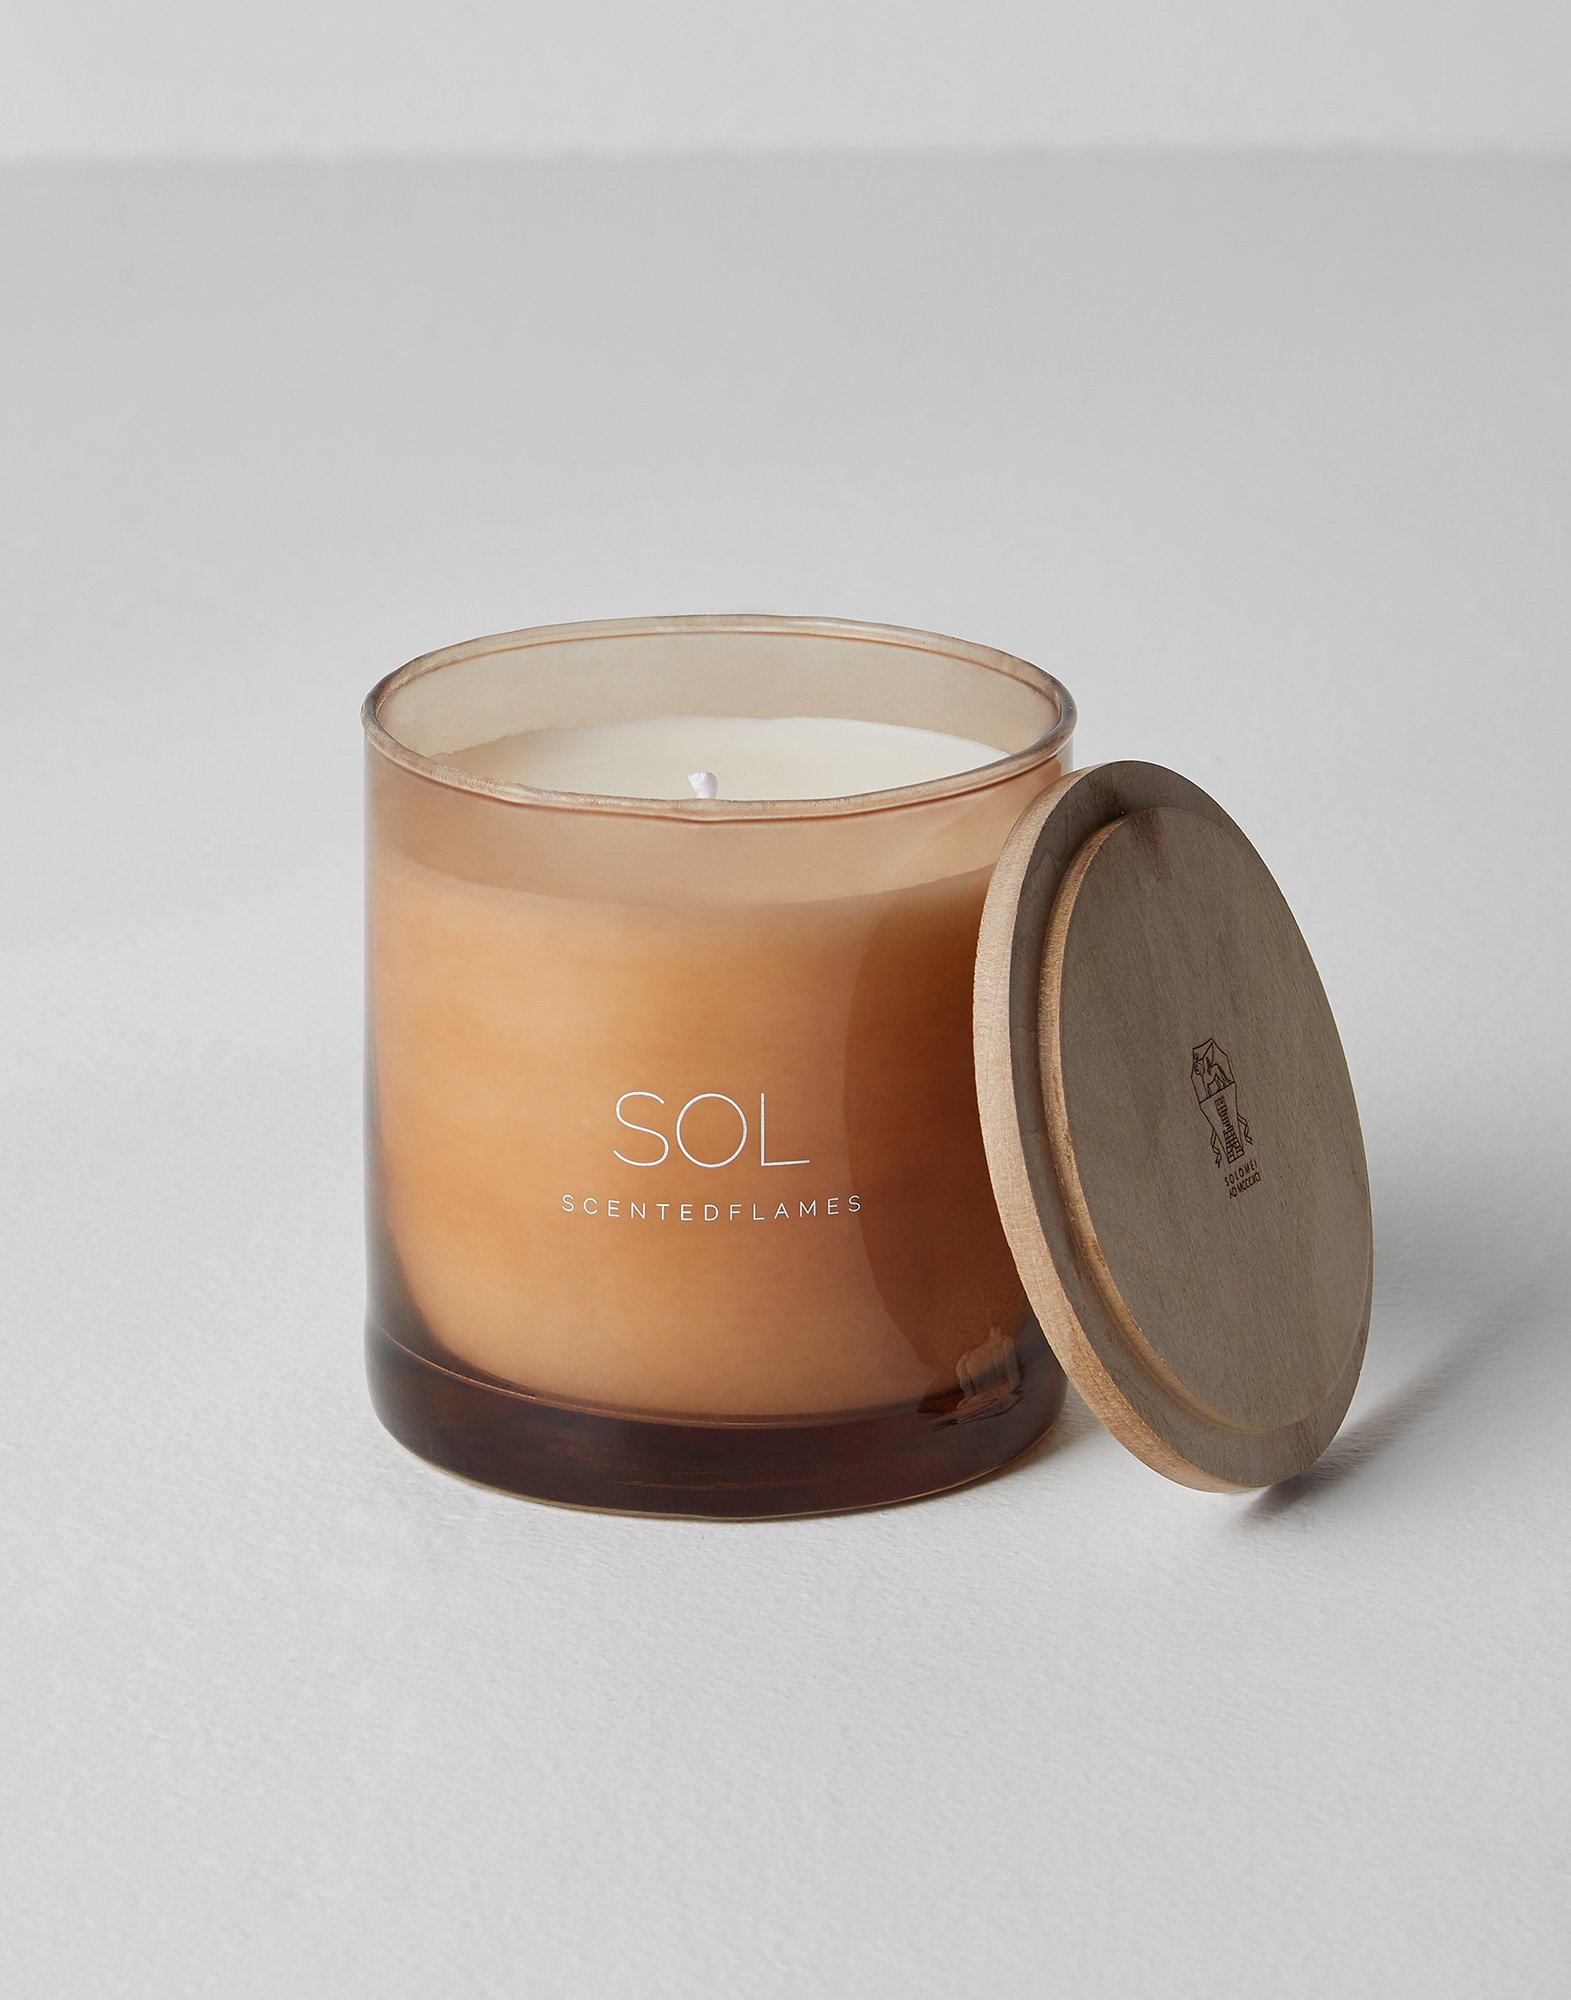 Scented candle with Sol fragrance